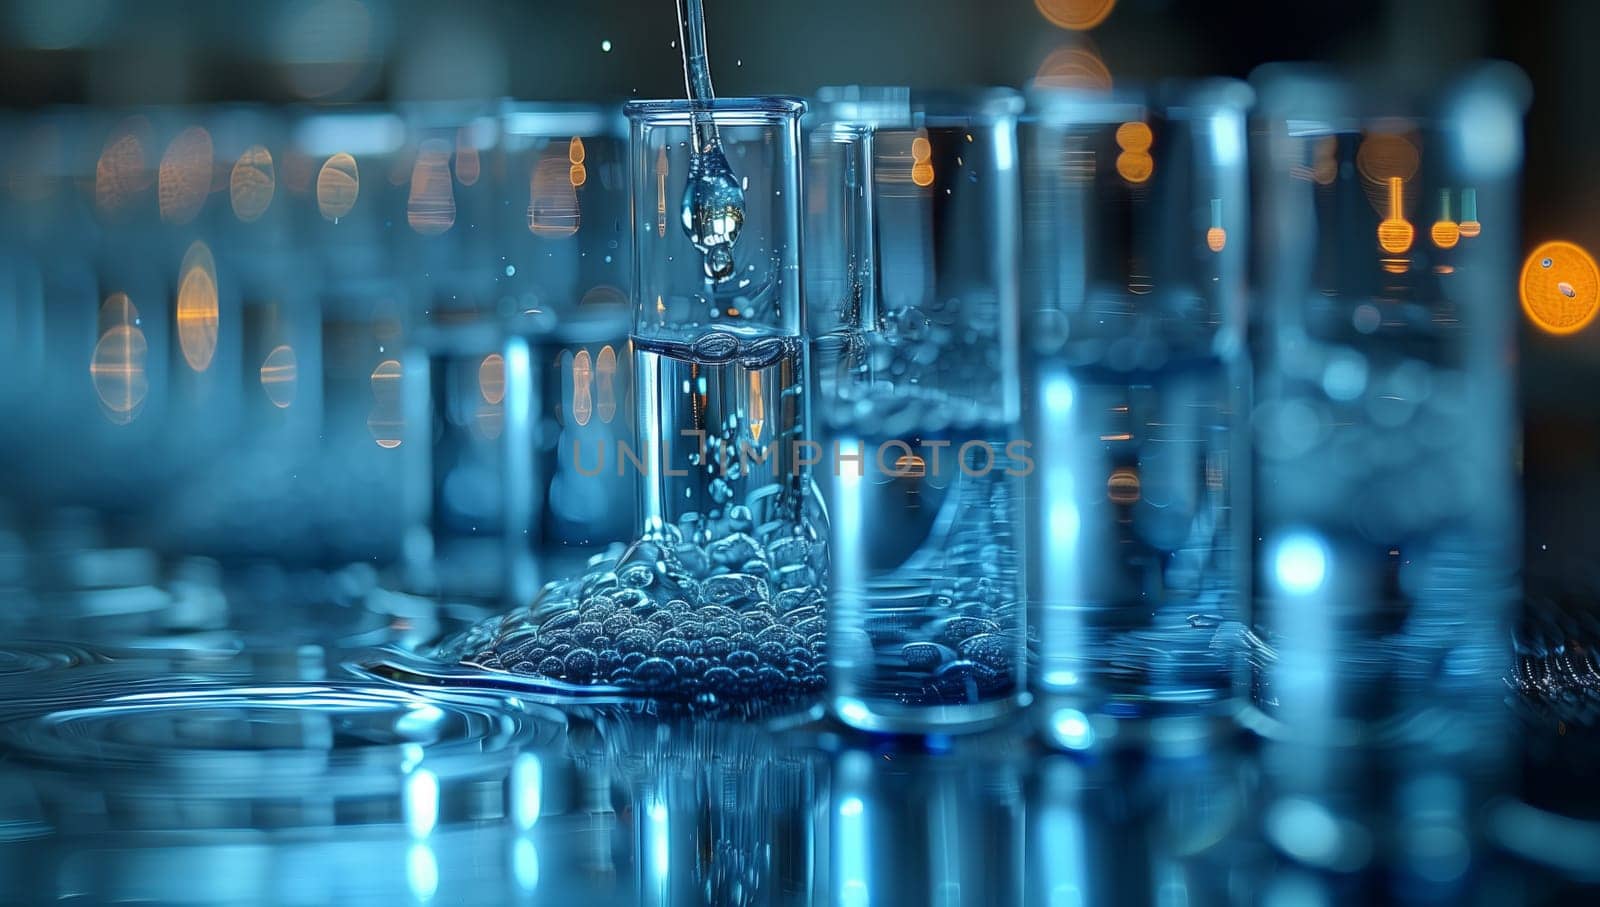 Liquid water is poured into glass test tubes in a laboratory by richwolf